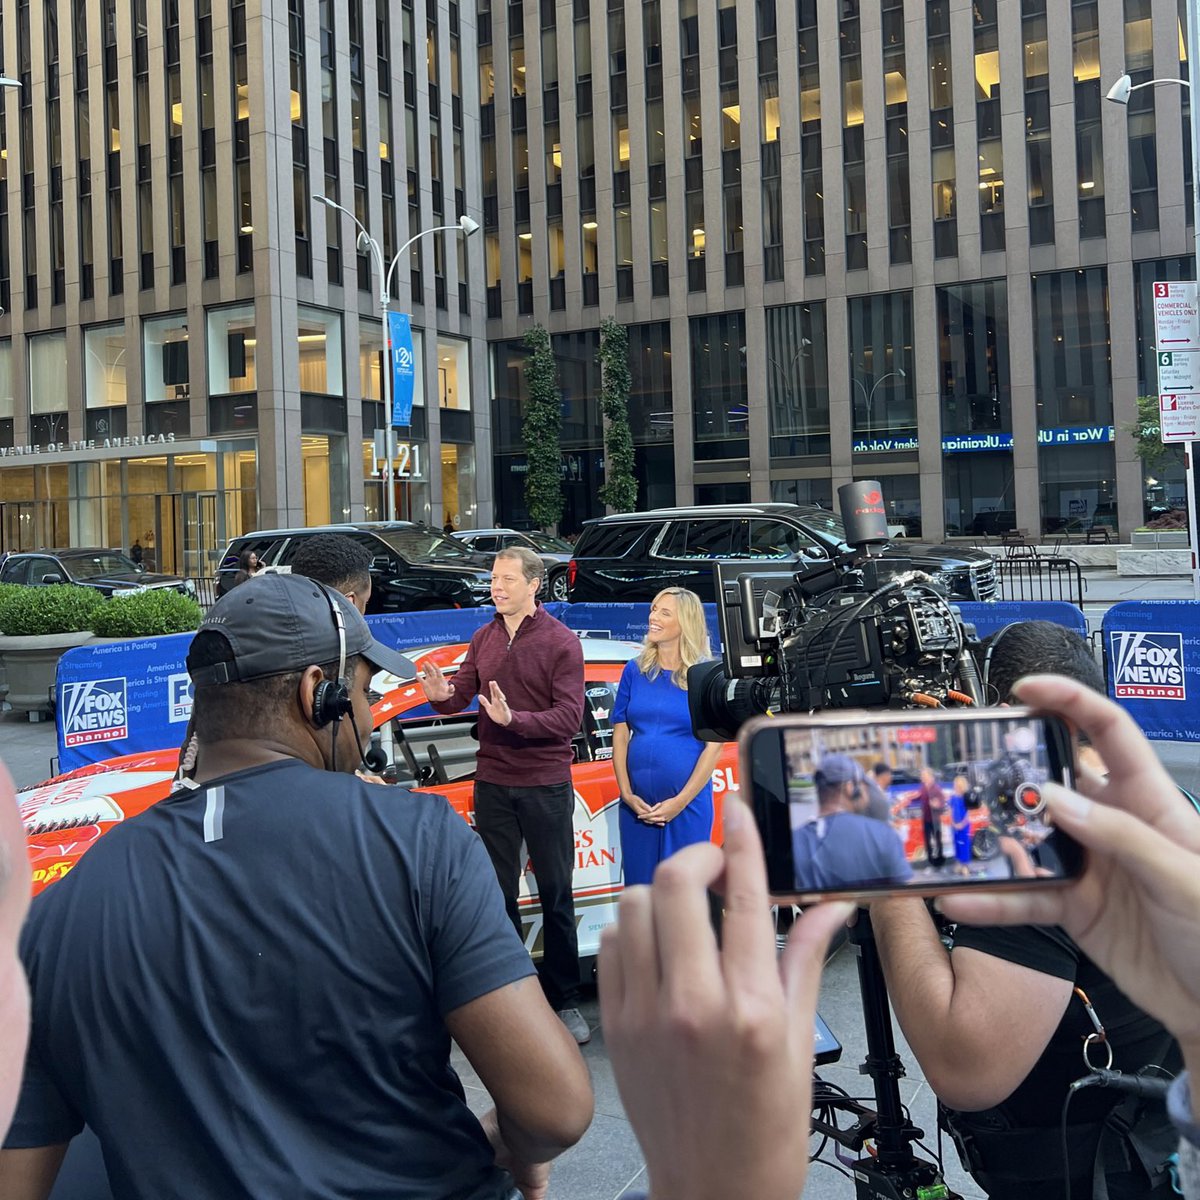 Making sliders in front of America 📺🍞 Did y’all catch BK and the No. 6 @KingsHawaiian Ford on @foxandfriends this morning?